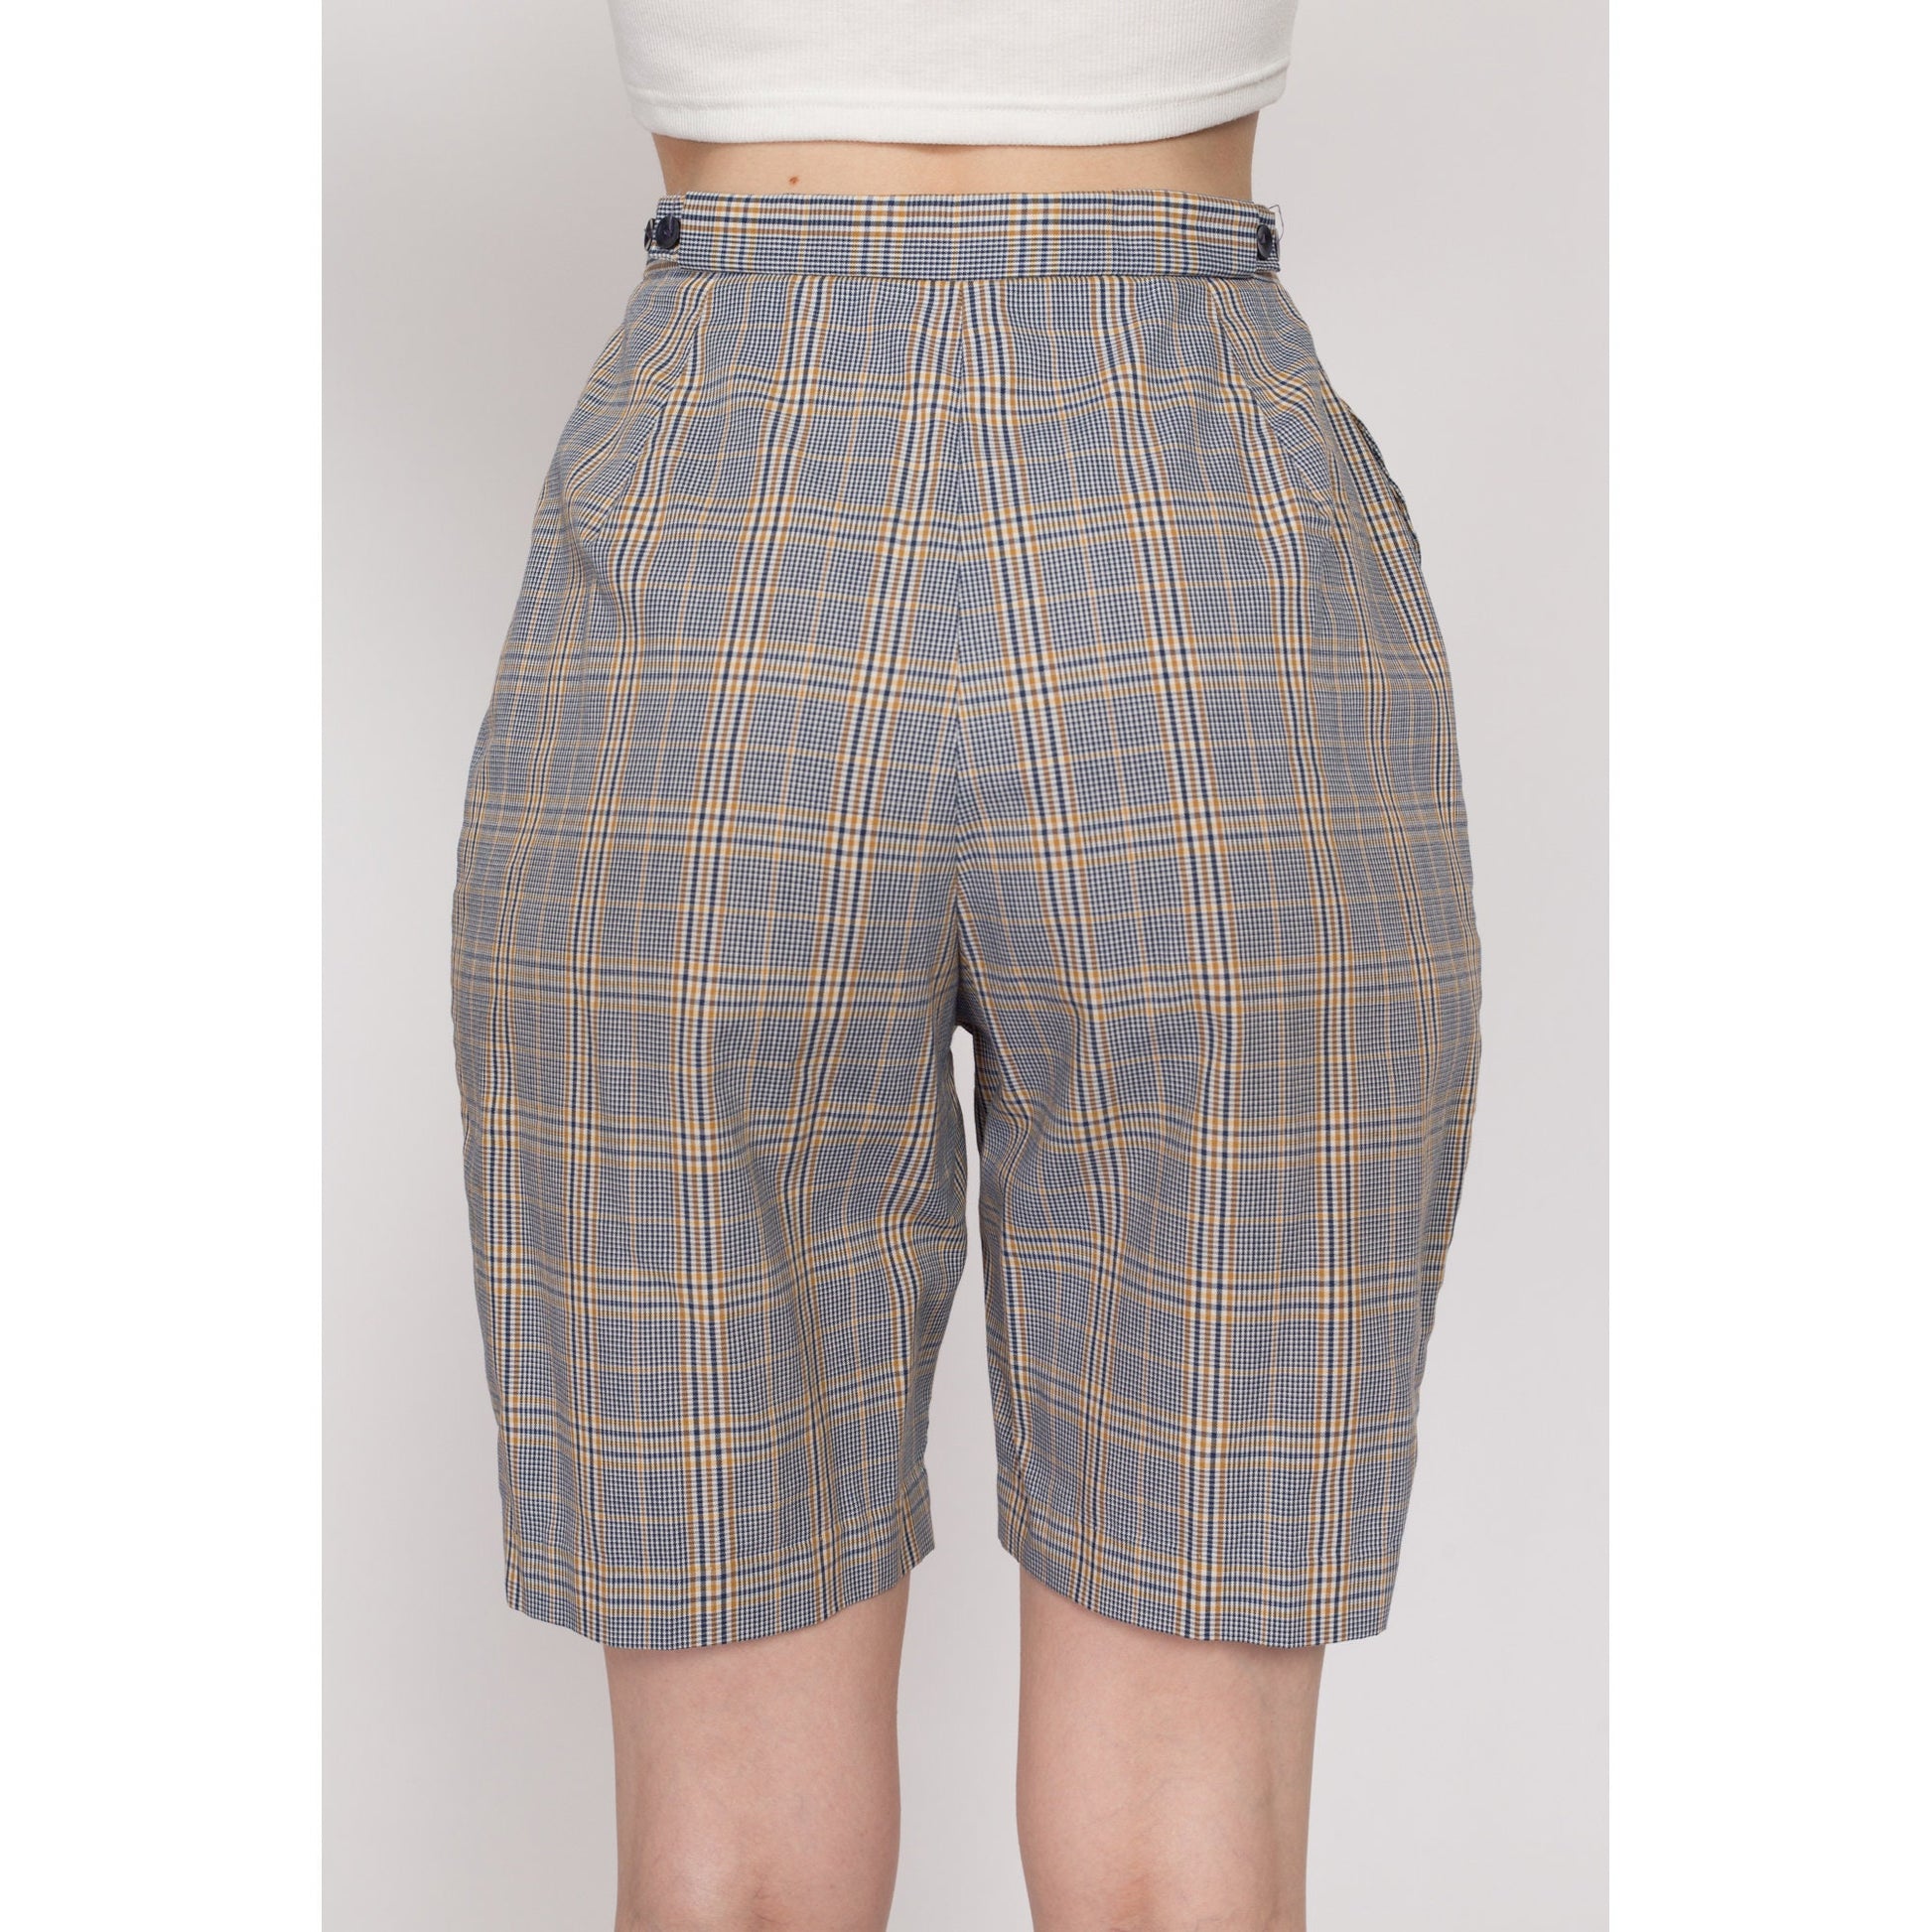 XS 60s Blue & Yellow Plaid High Waisted Shorts 23"-25" | Retro Vintage Curvy Hourglass Fit Bermuda Shorts